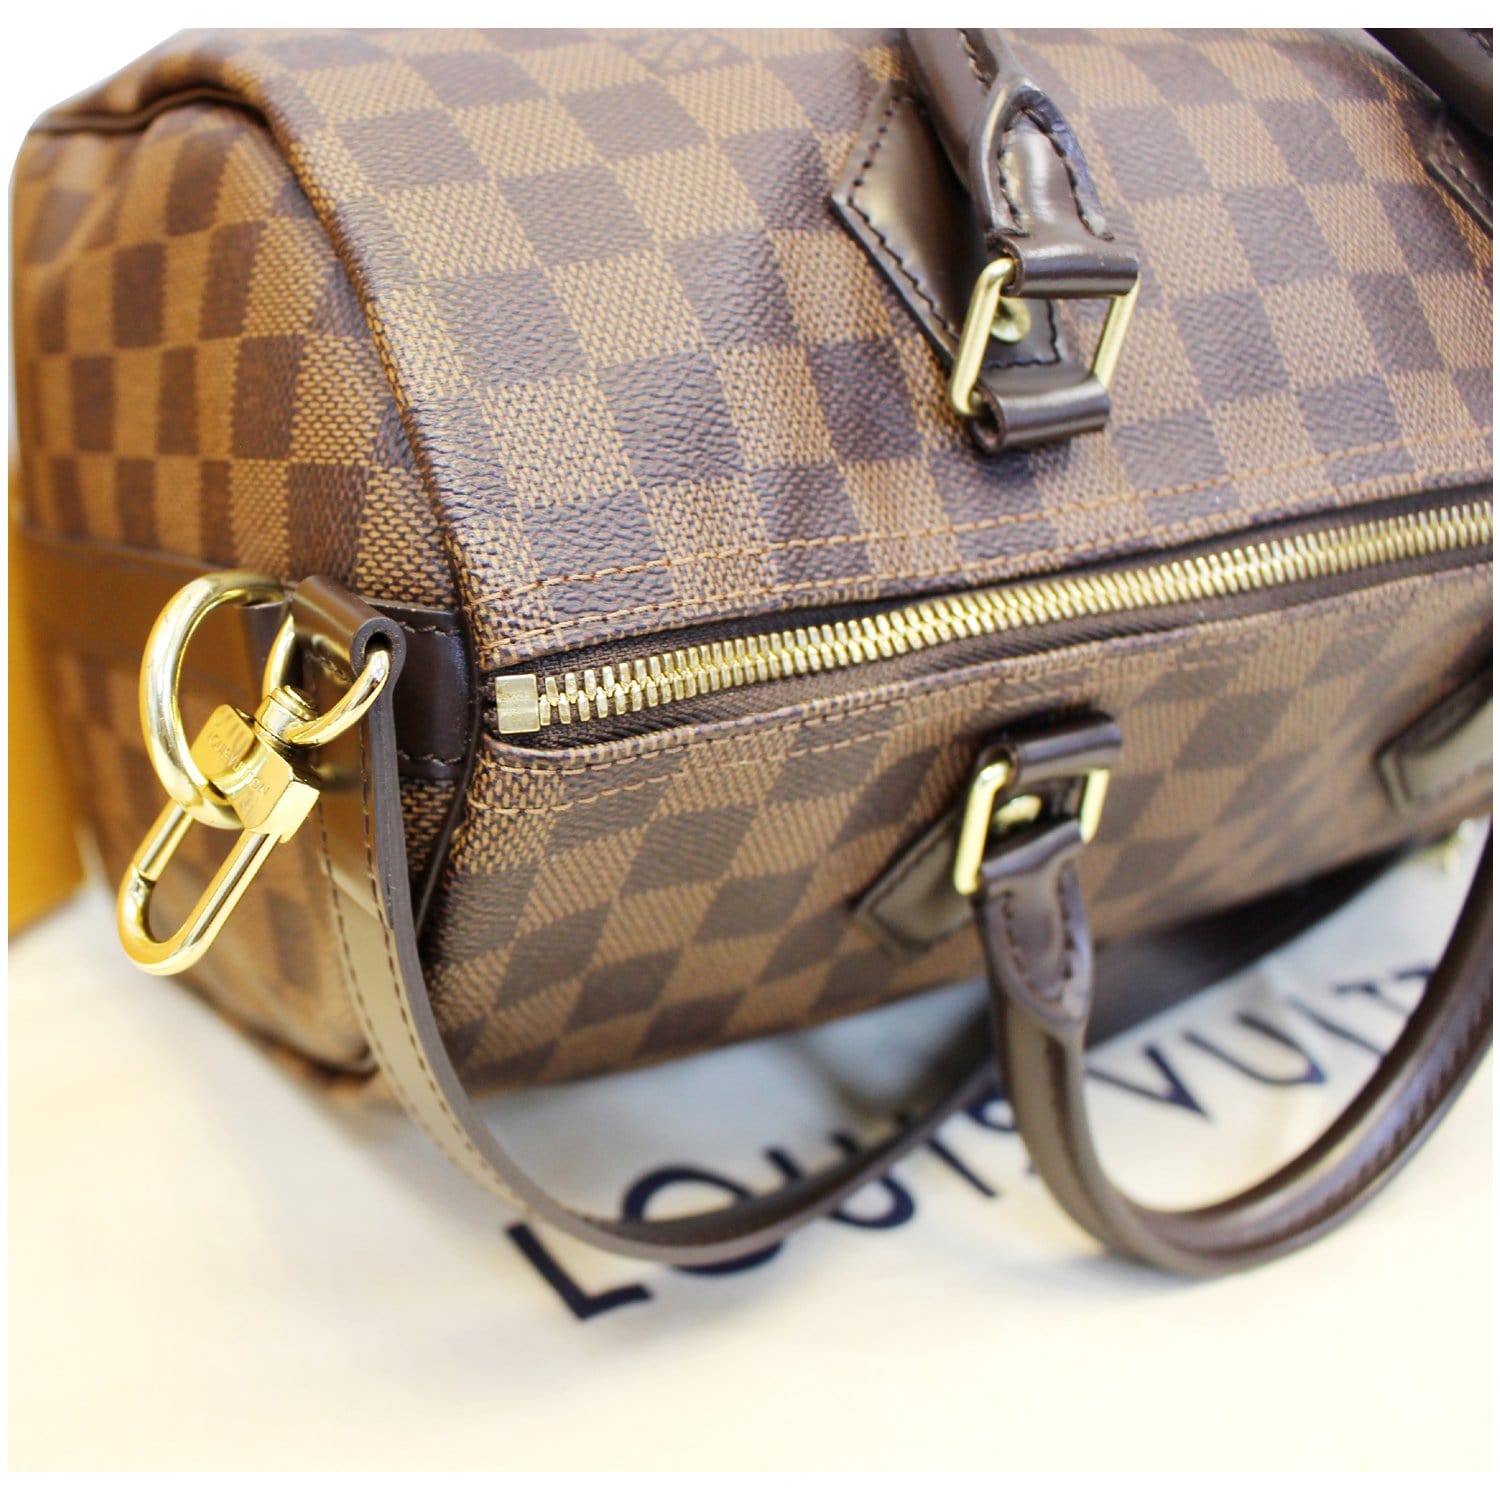 Louis Vuitton-Damier Ebene Speedy Bandouliere 30 with Strap - Couture  Traders